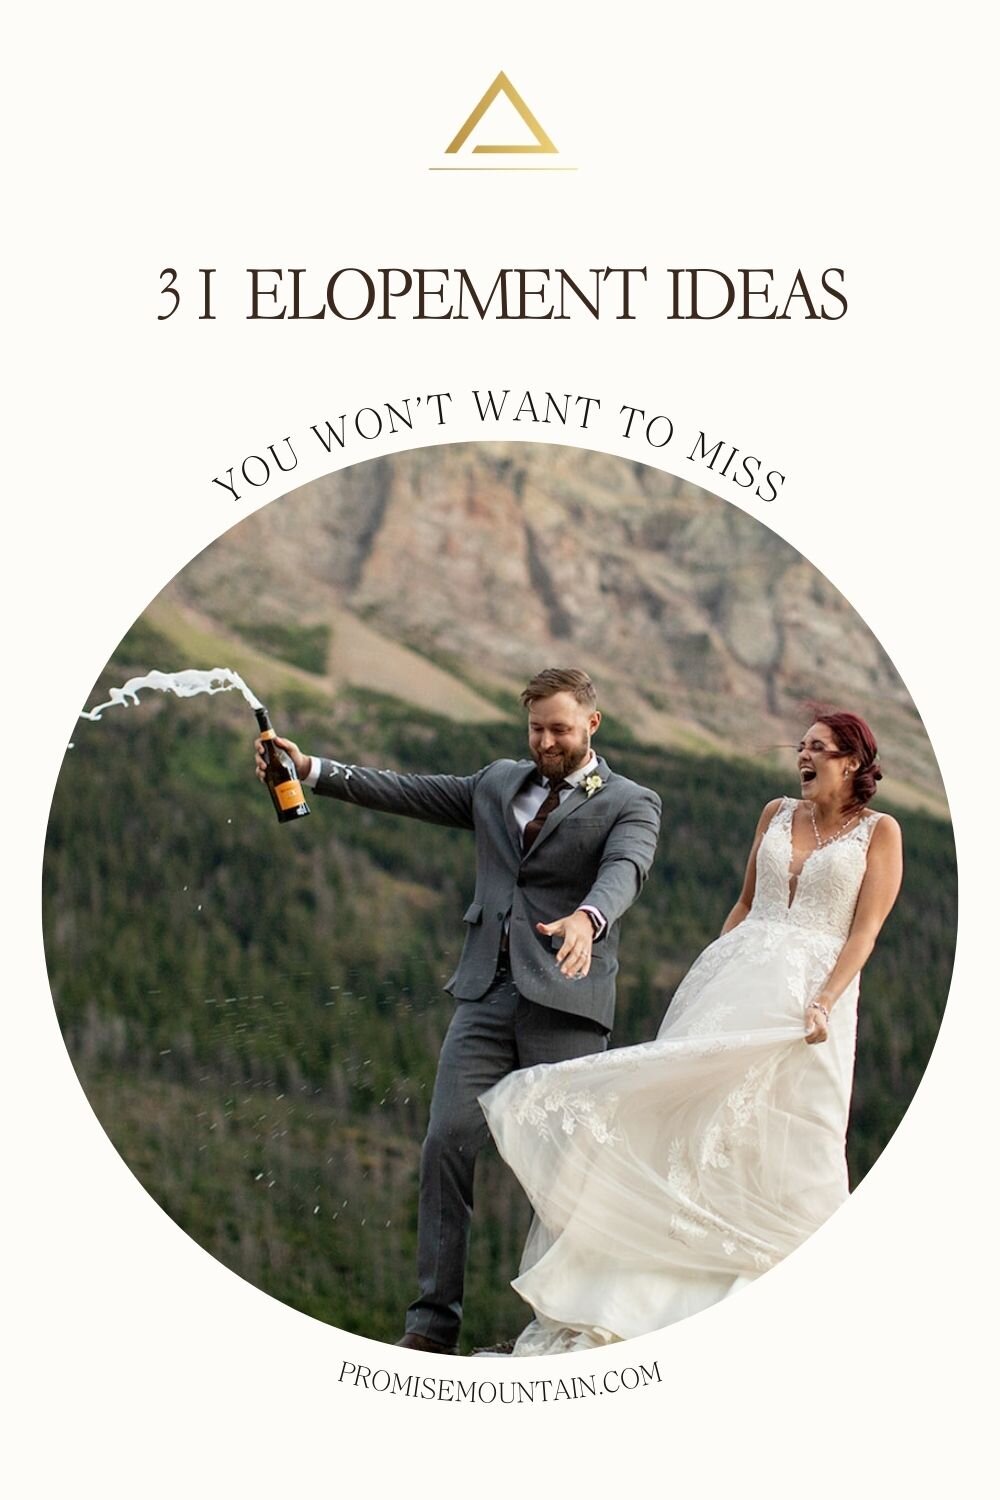 Bride and groom popping champagne during their elopement; image overlaid with text that reads 31 Elopement Ideas You Won't Want to Miss